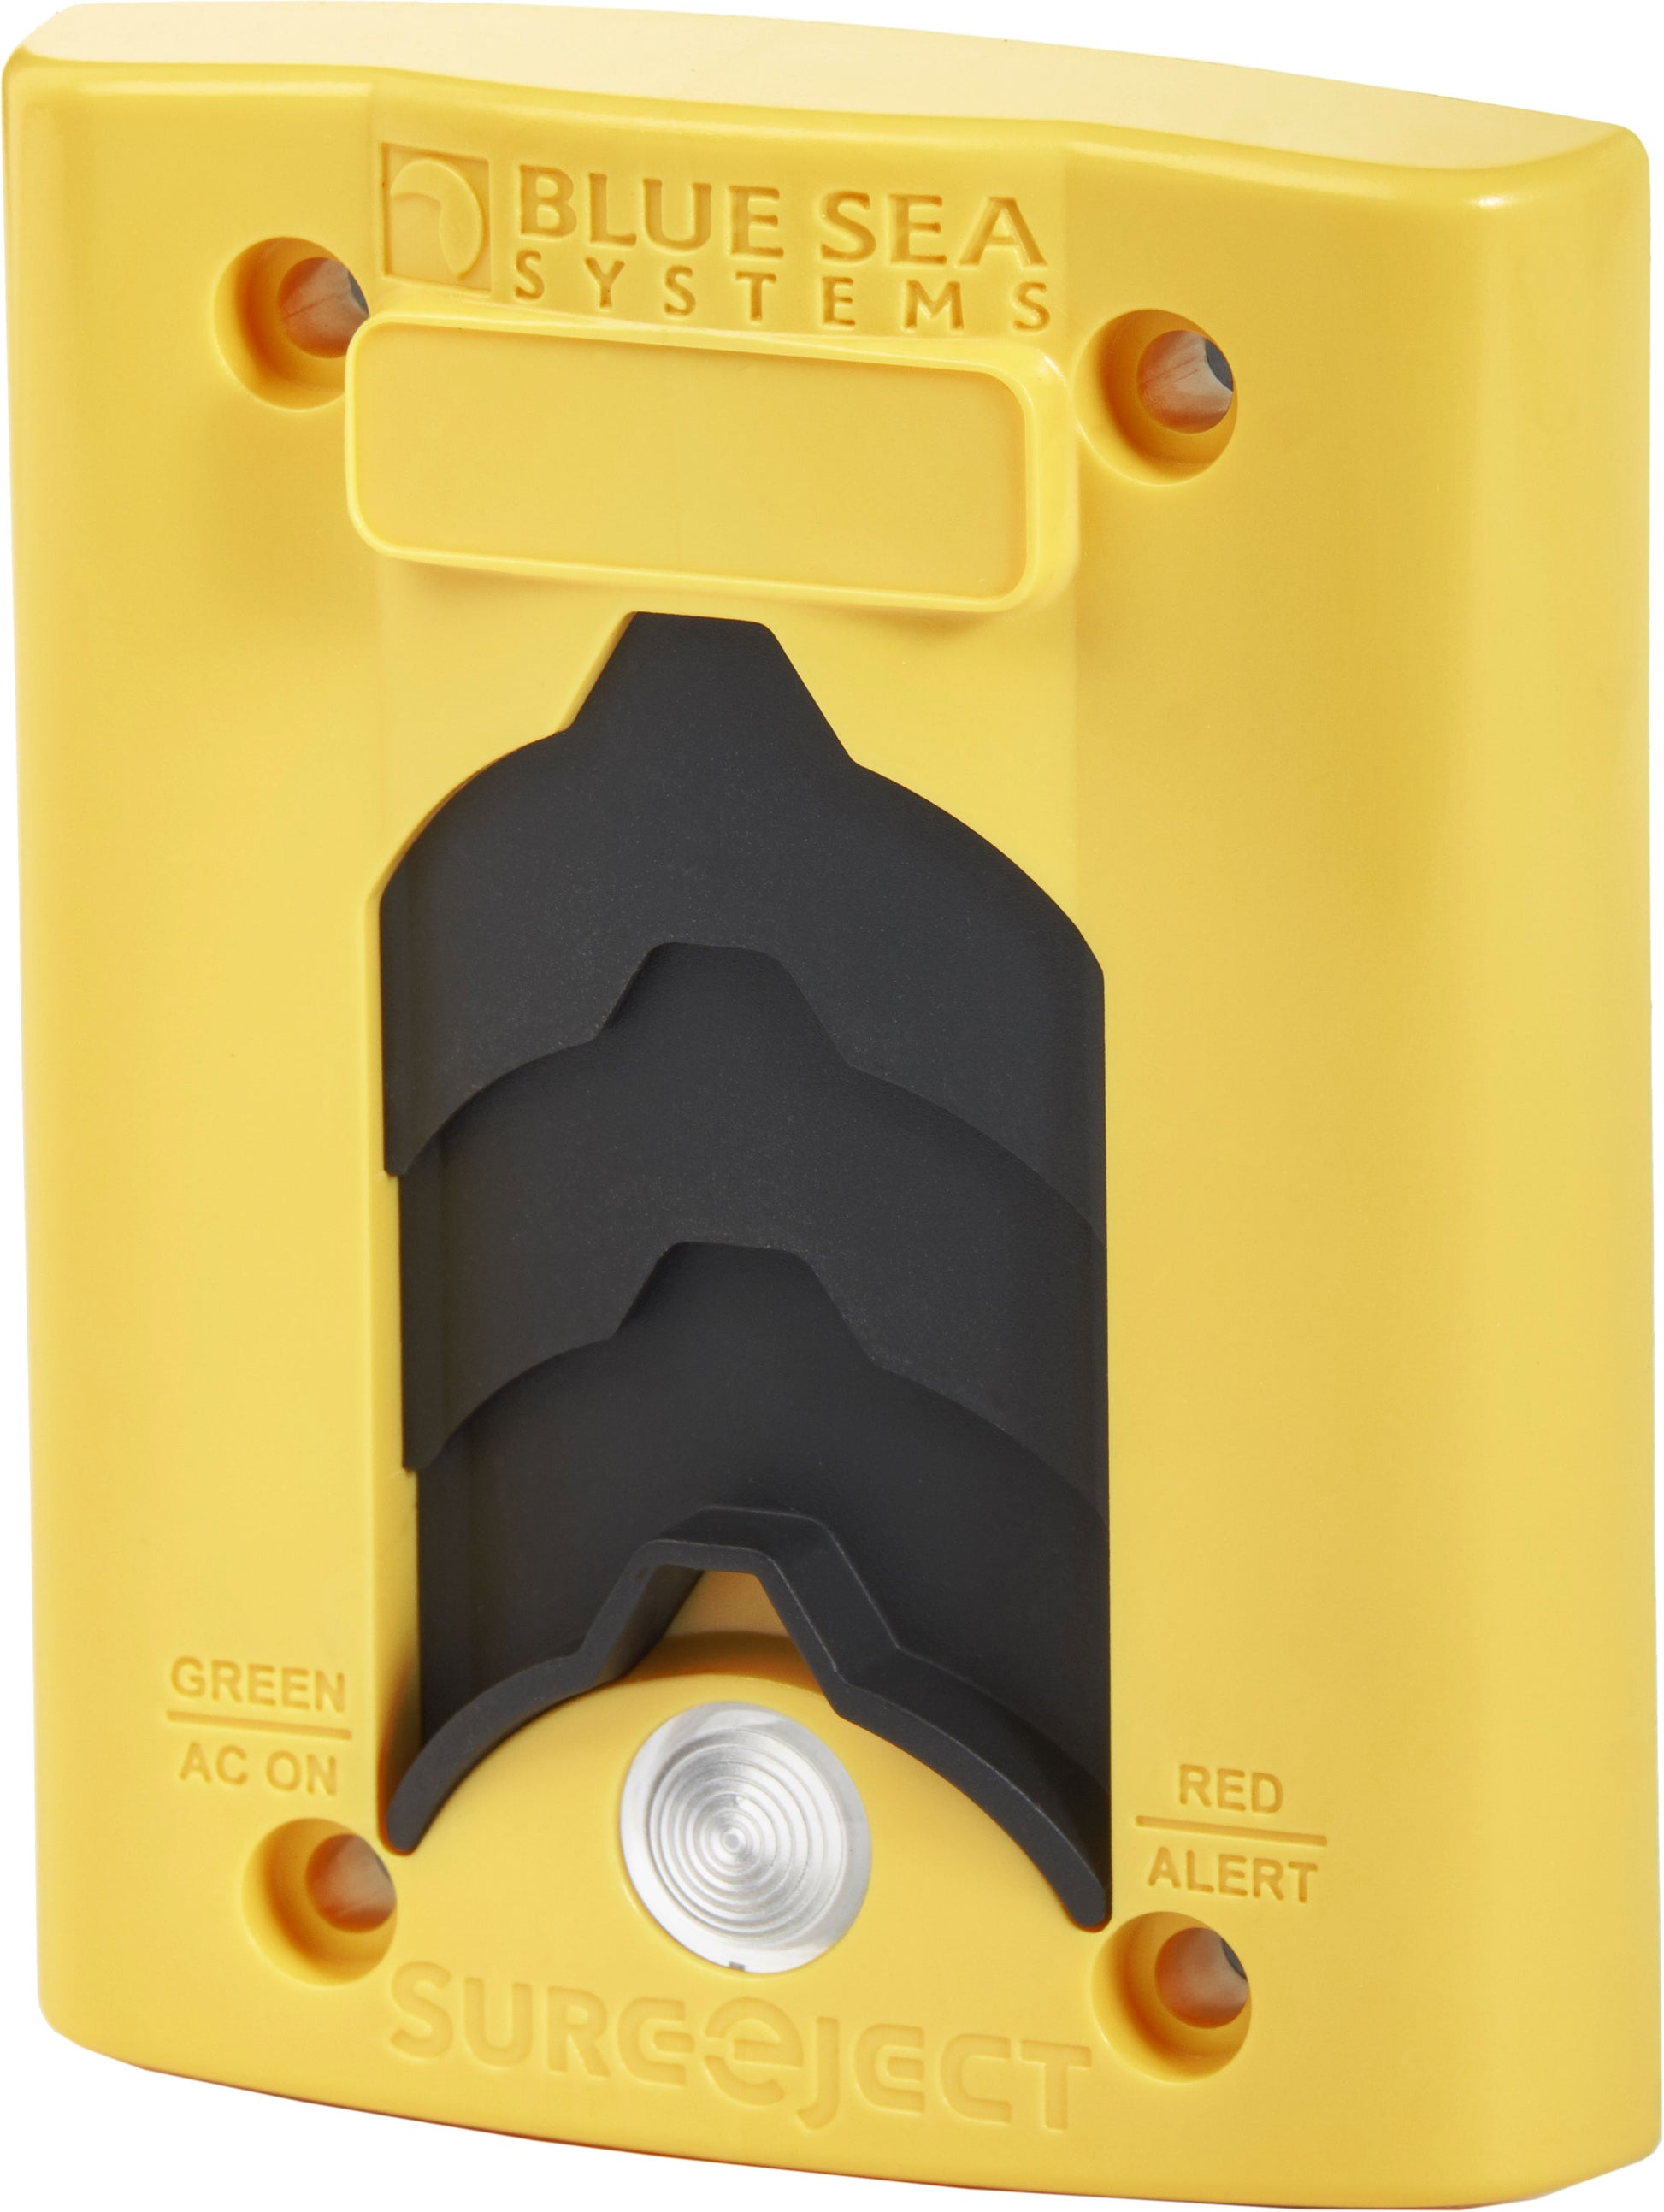 Blue Sea Sure Eject Cover, Yellow, 40-7820